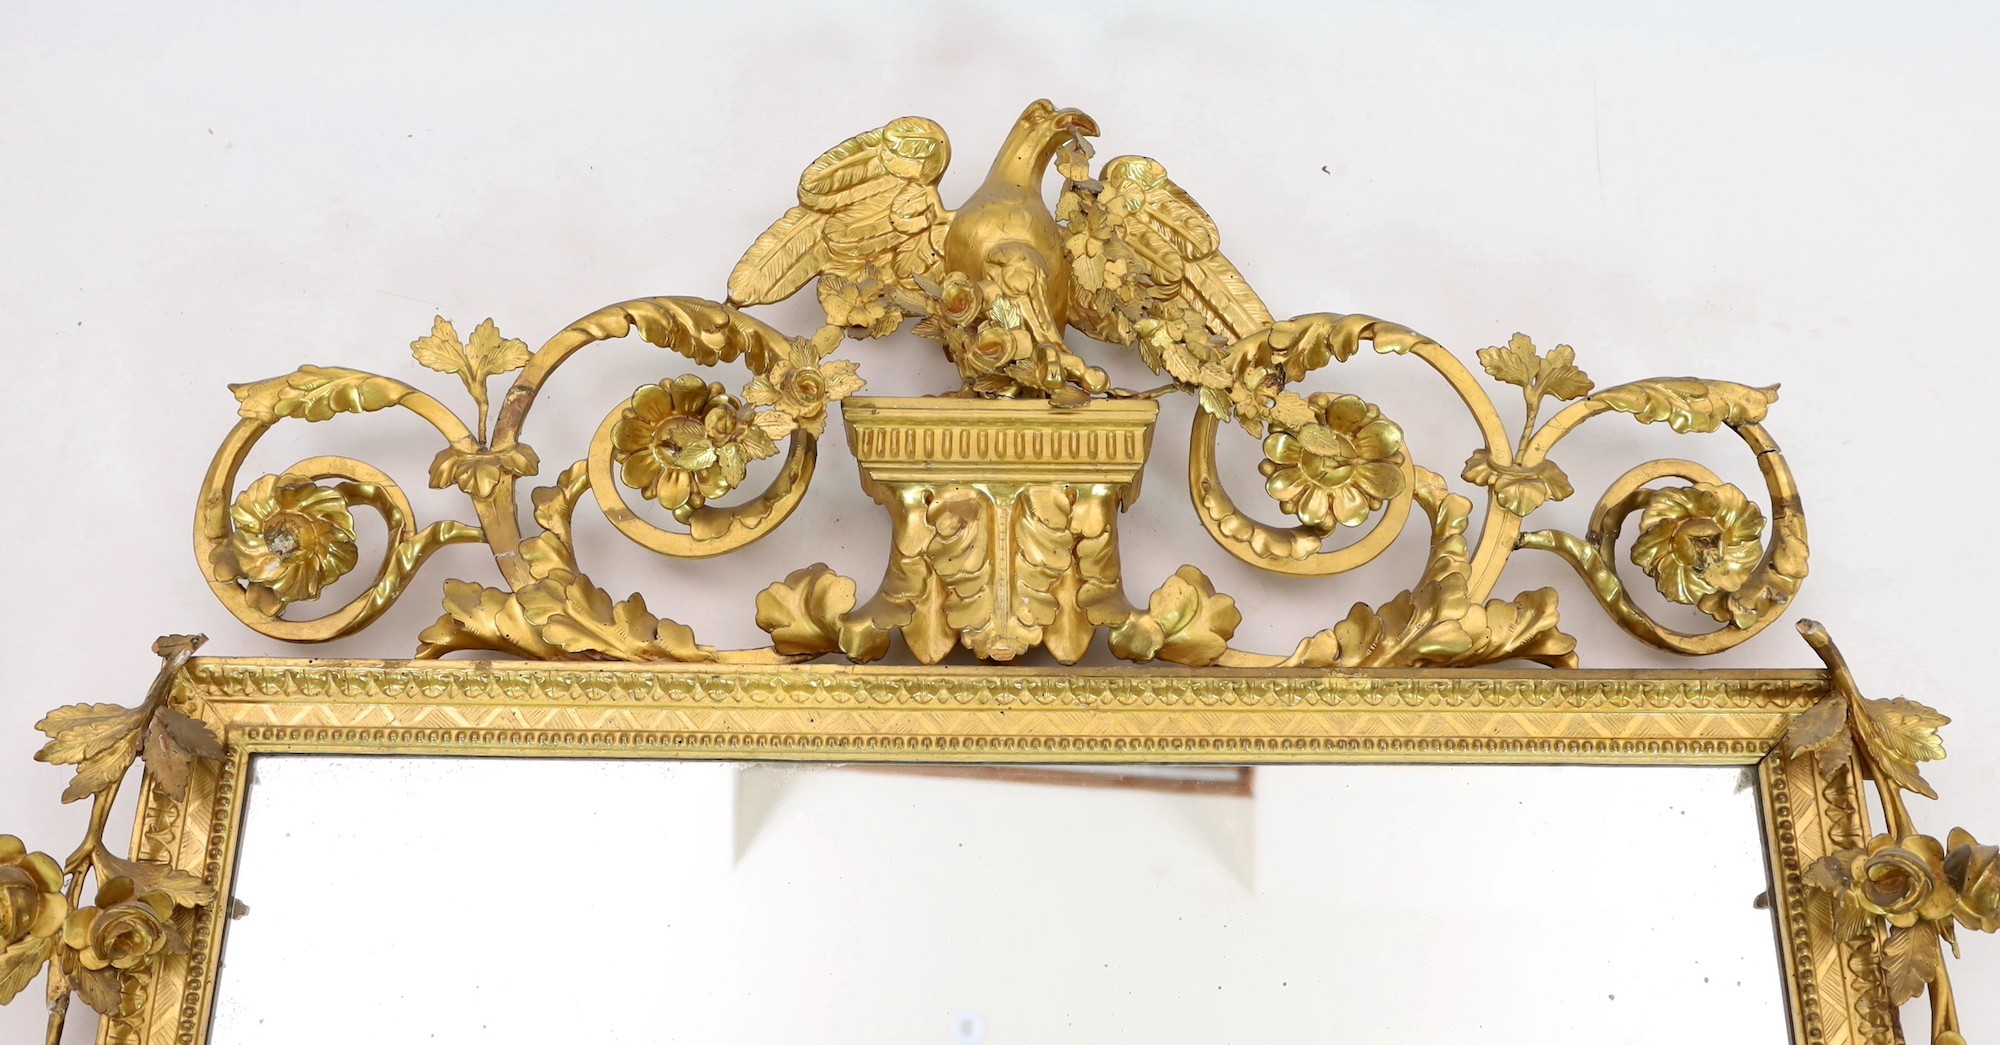 A 19th century century carved giltwood wall mirror, with elaborate ornate eagle and flowering swag - Image 3 of 4